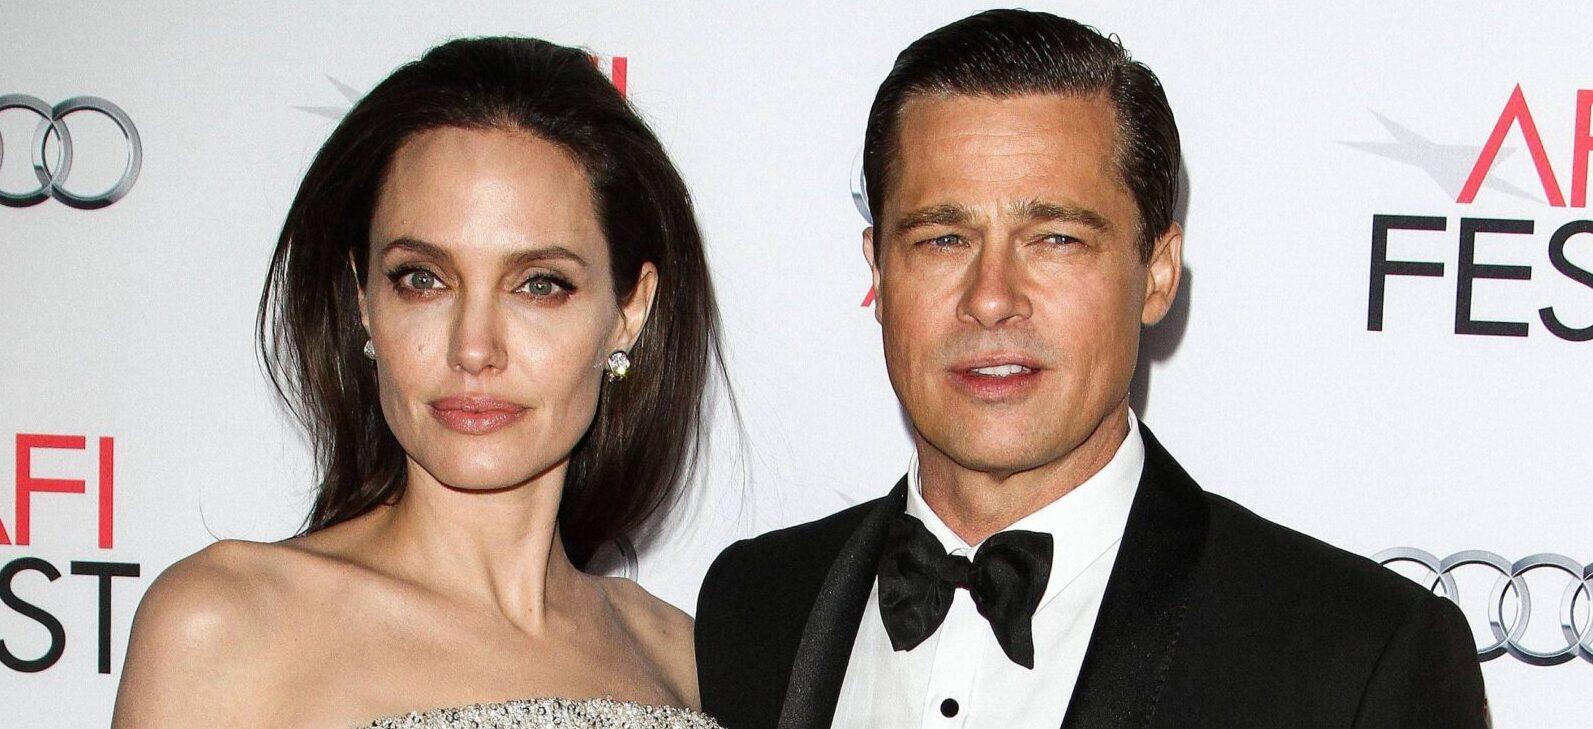 Angelina Jolie & Brad Pitt’s Son Pax Branded His Father An ‘Awful Human Being’